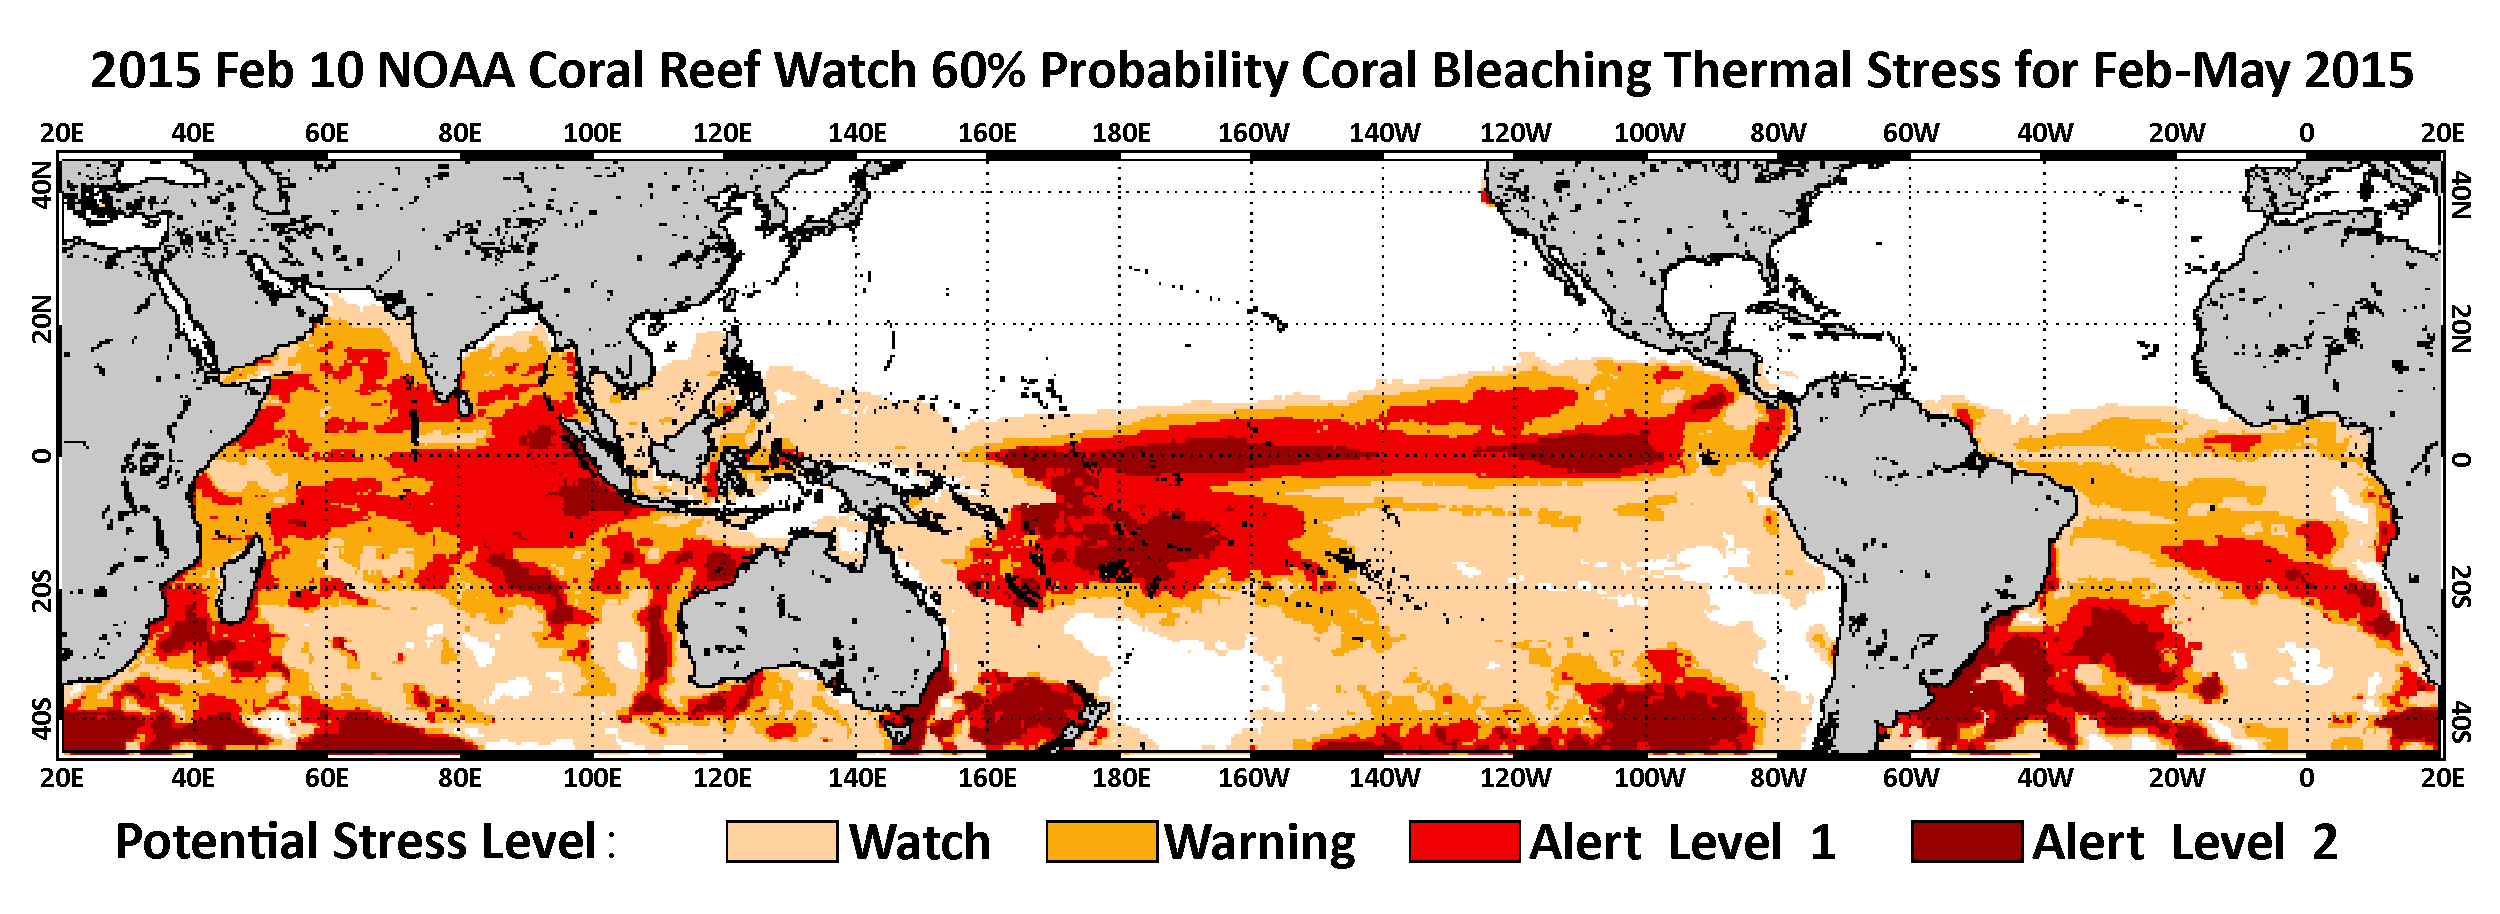 NOAA Coral Reef Watch’s newly-released four-month bleaching outlook indicates the greatest threat for coral bleaching through May 2015 is in the western Pacific and Indian Oceans in areas such American Samoa, Samoa, Western Australia, and Indonesia. 